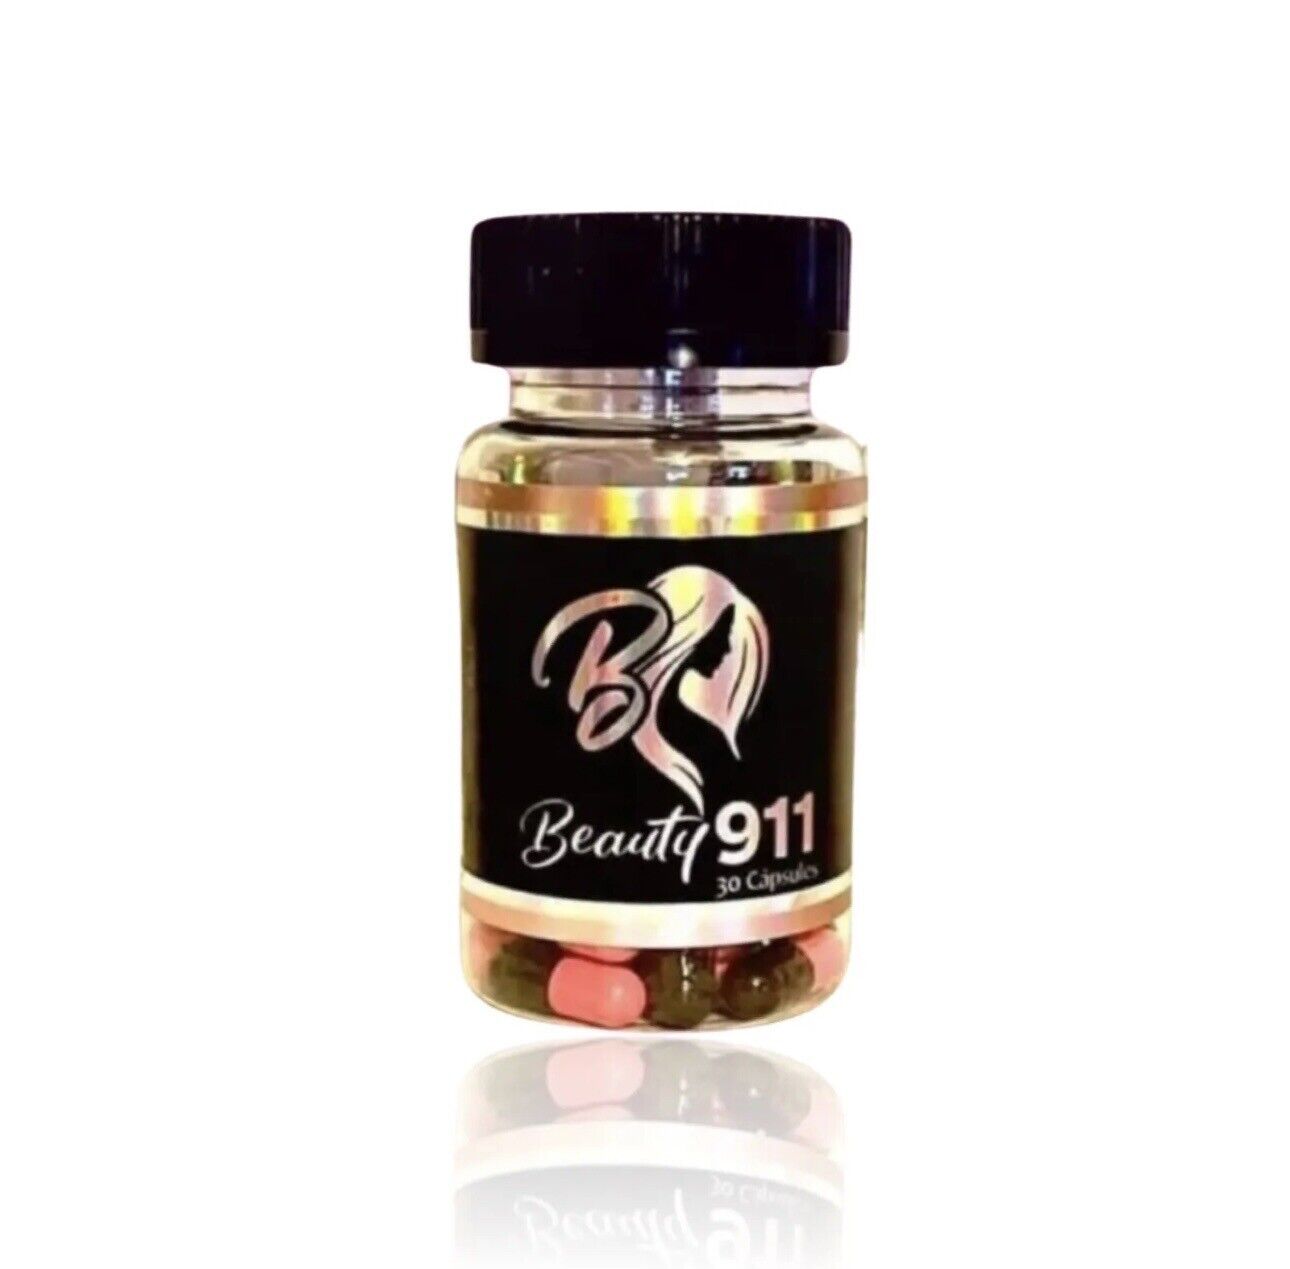 Beauty 911 Weight Loss Capsules Mana Infinity for Body Balance lose weight